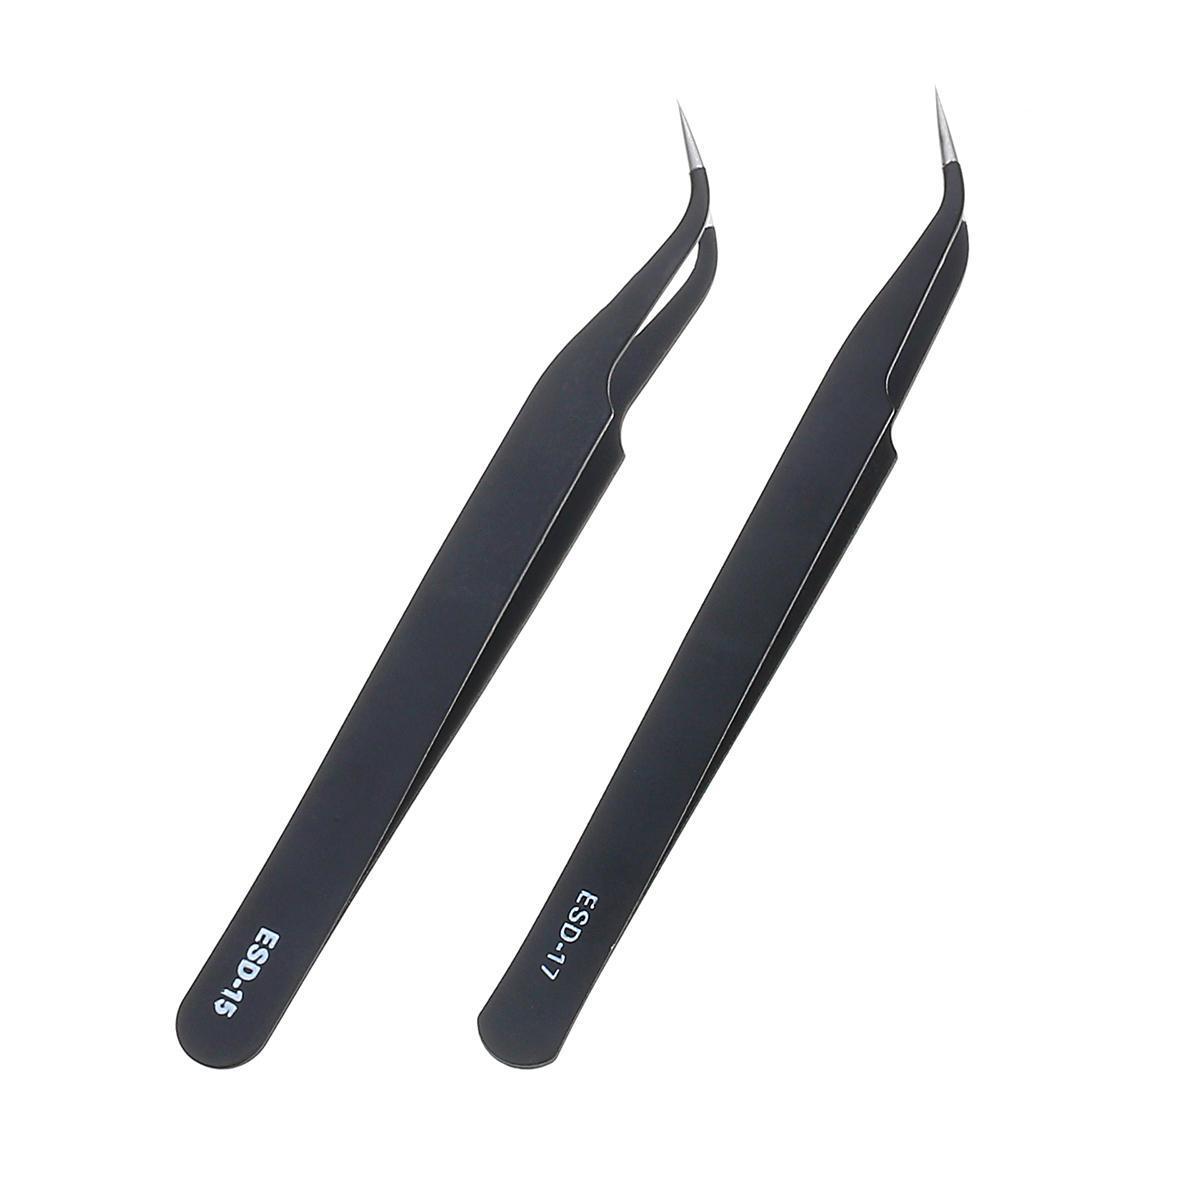 Anti-static Stainless Steel Precision Tweezers for Electronics / 3D Printing - PrinterMods